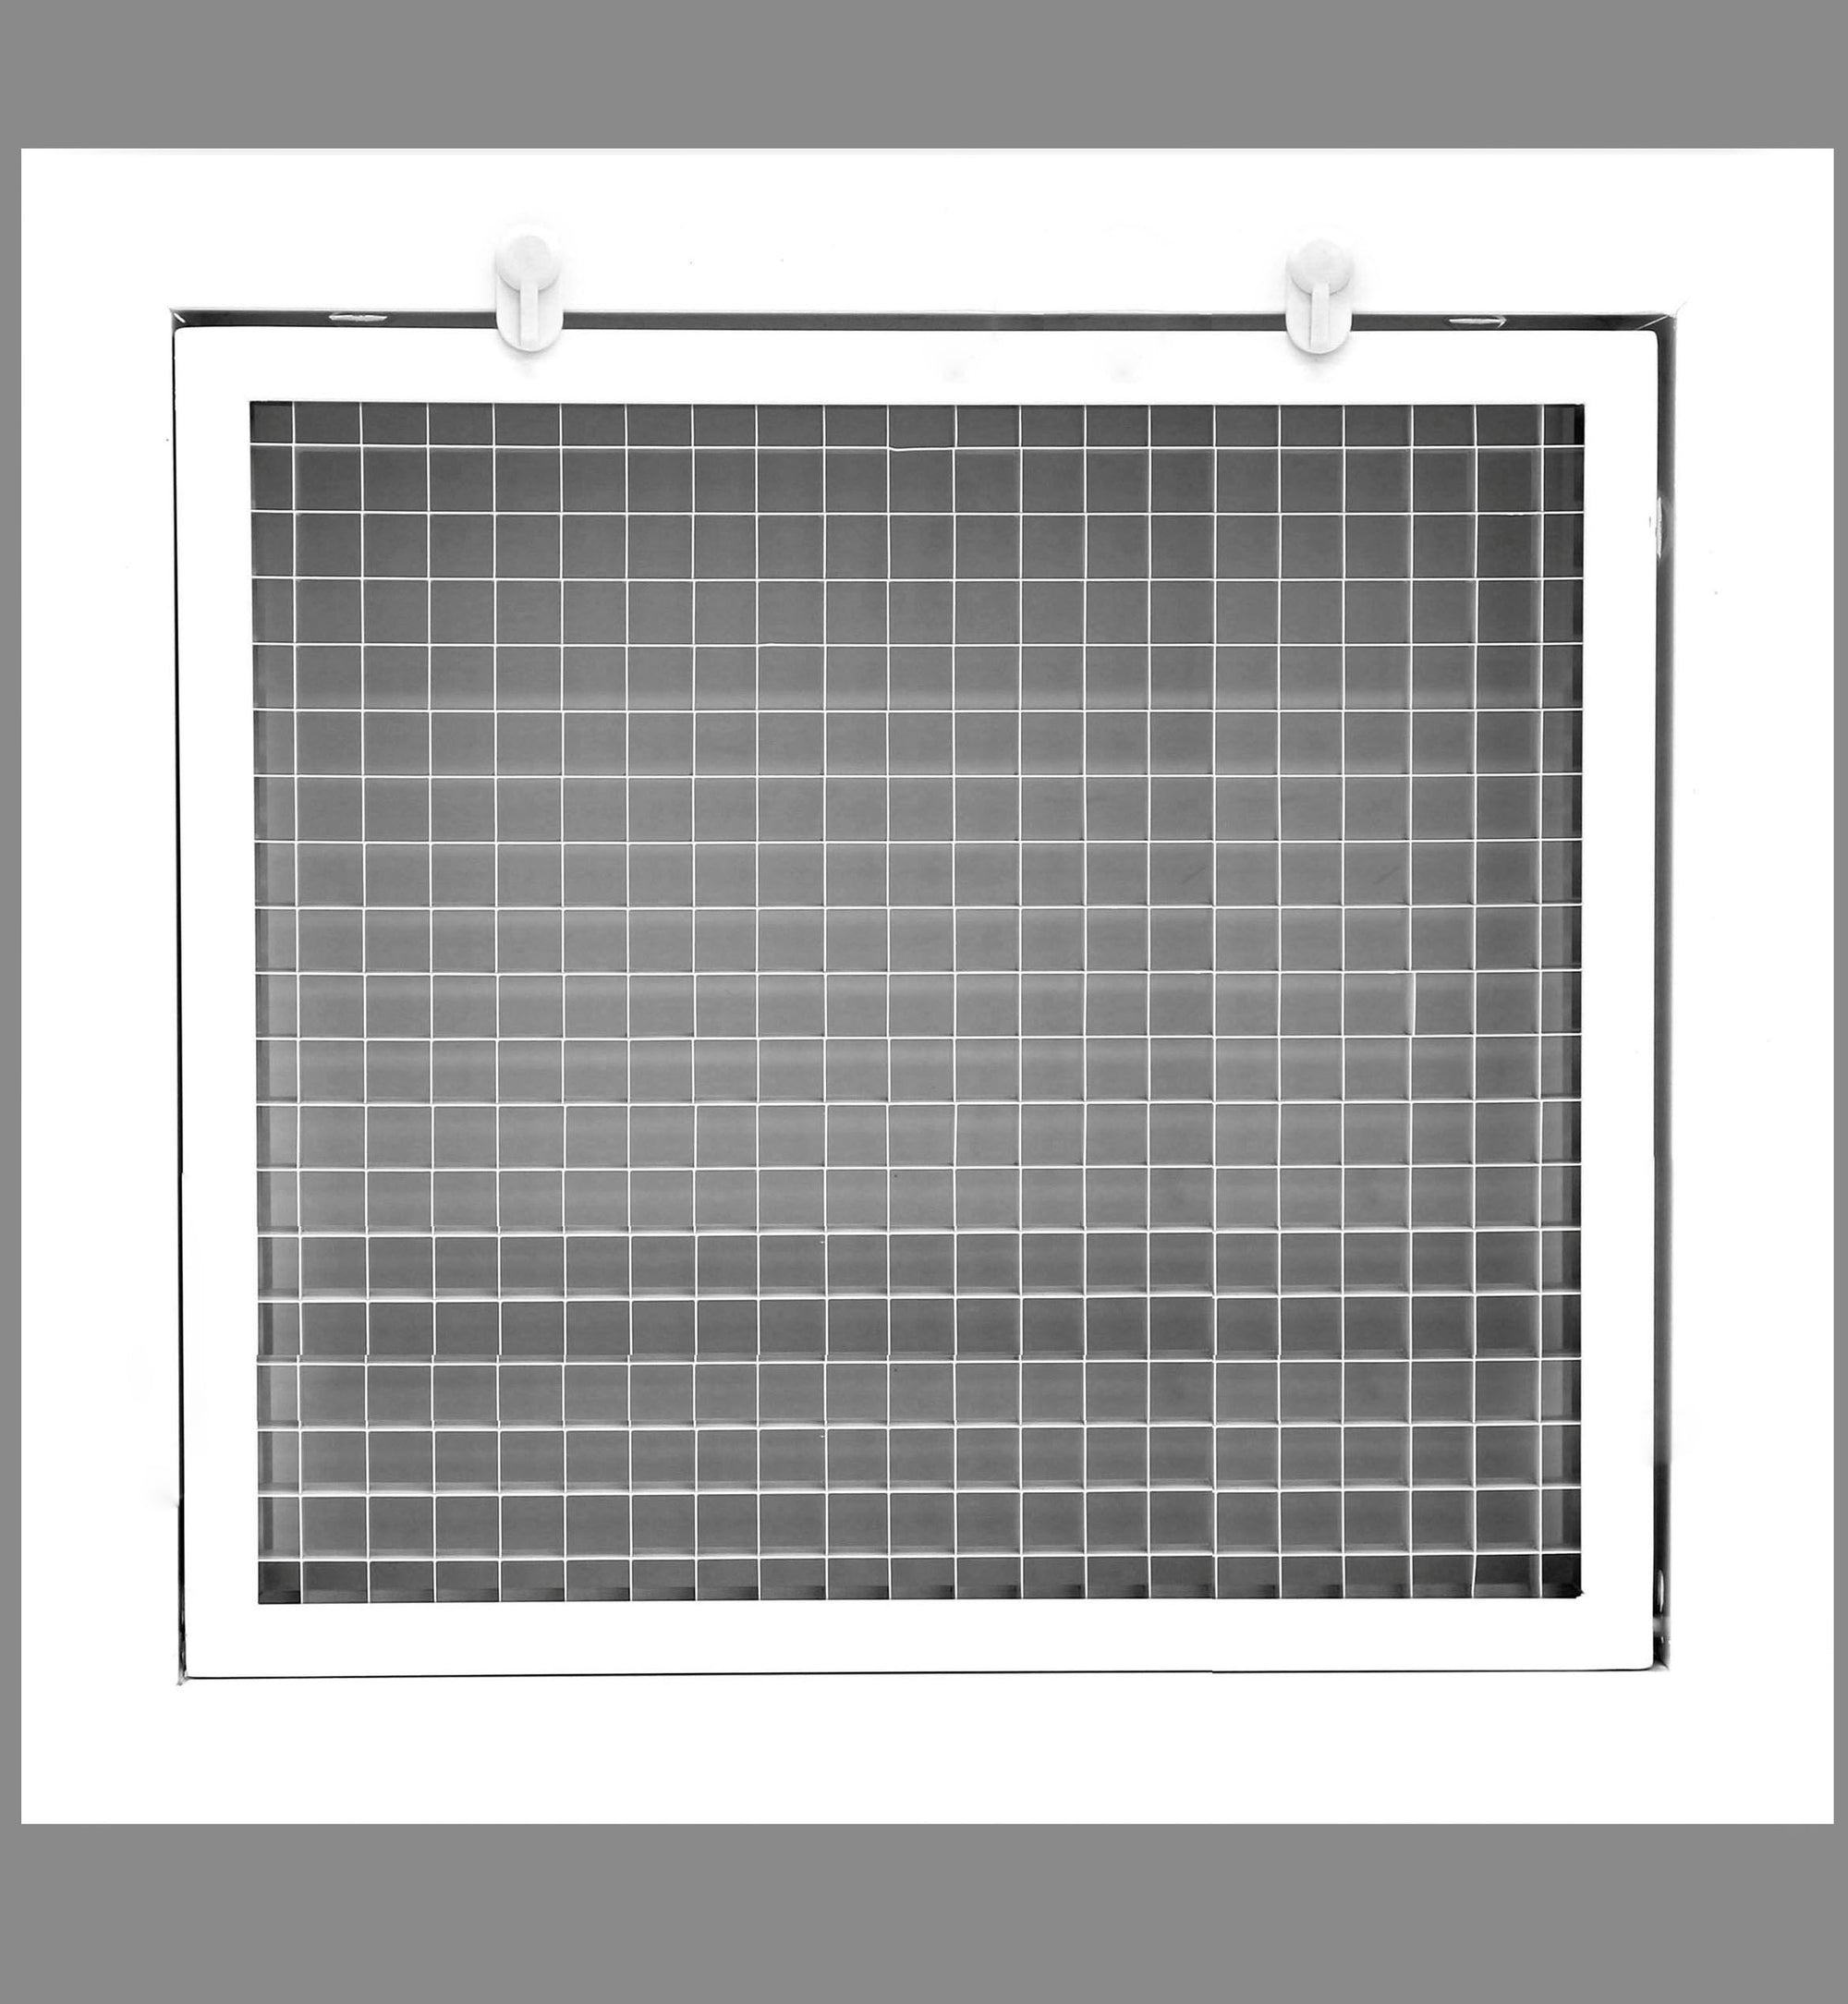 10" x 8" Cube Core Eggcrate Return Air Filter Grille for 1" Filter